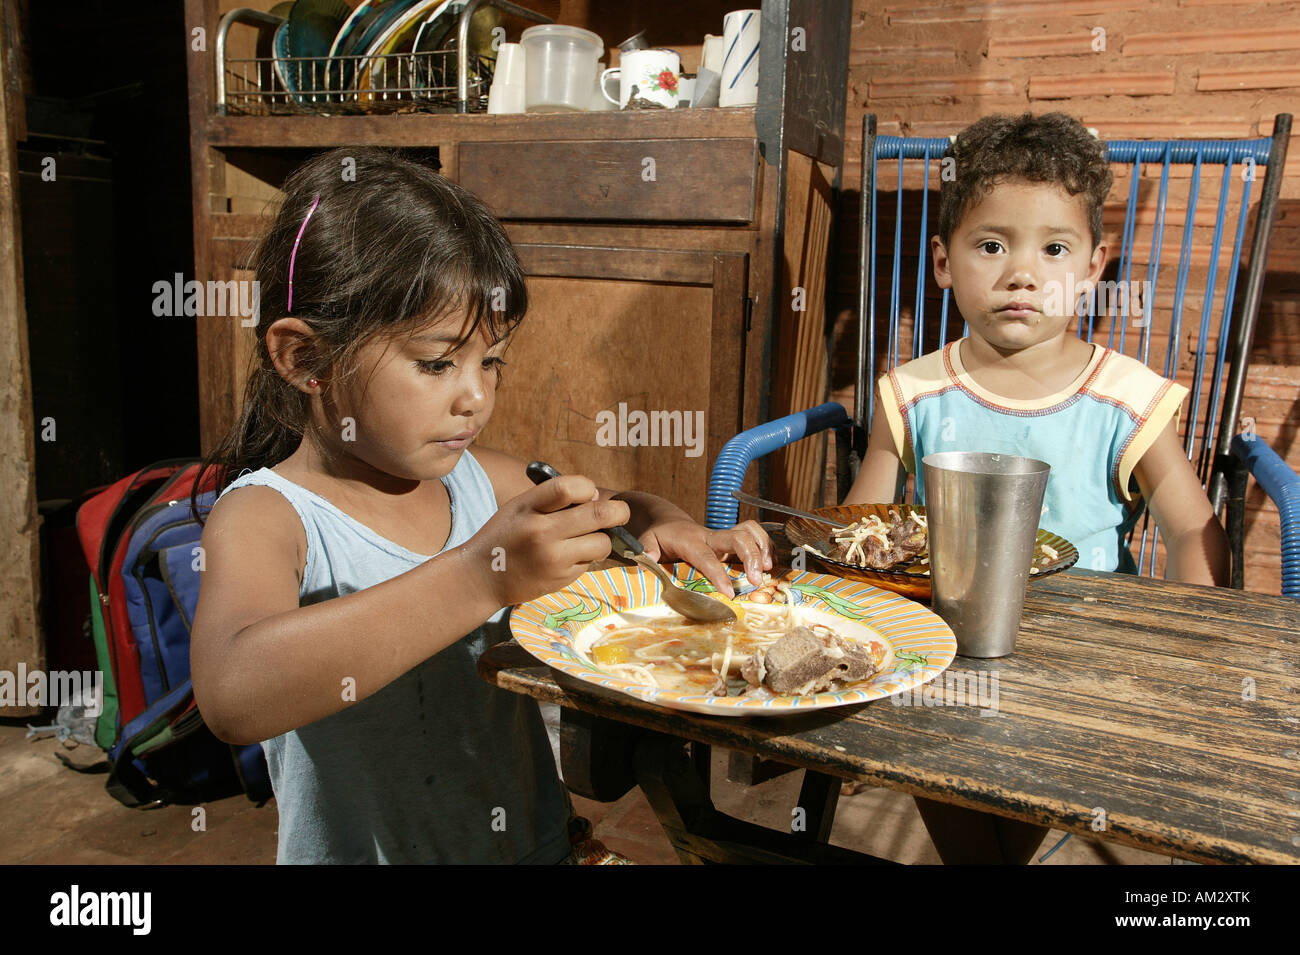 Guarani children eating in the poor area of Chacarita, Asuncion, Paraguay, South America Stock Photo